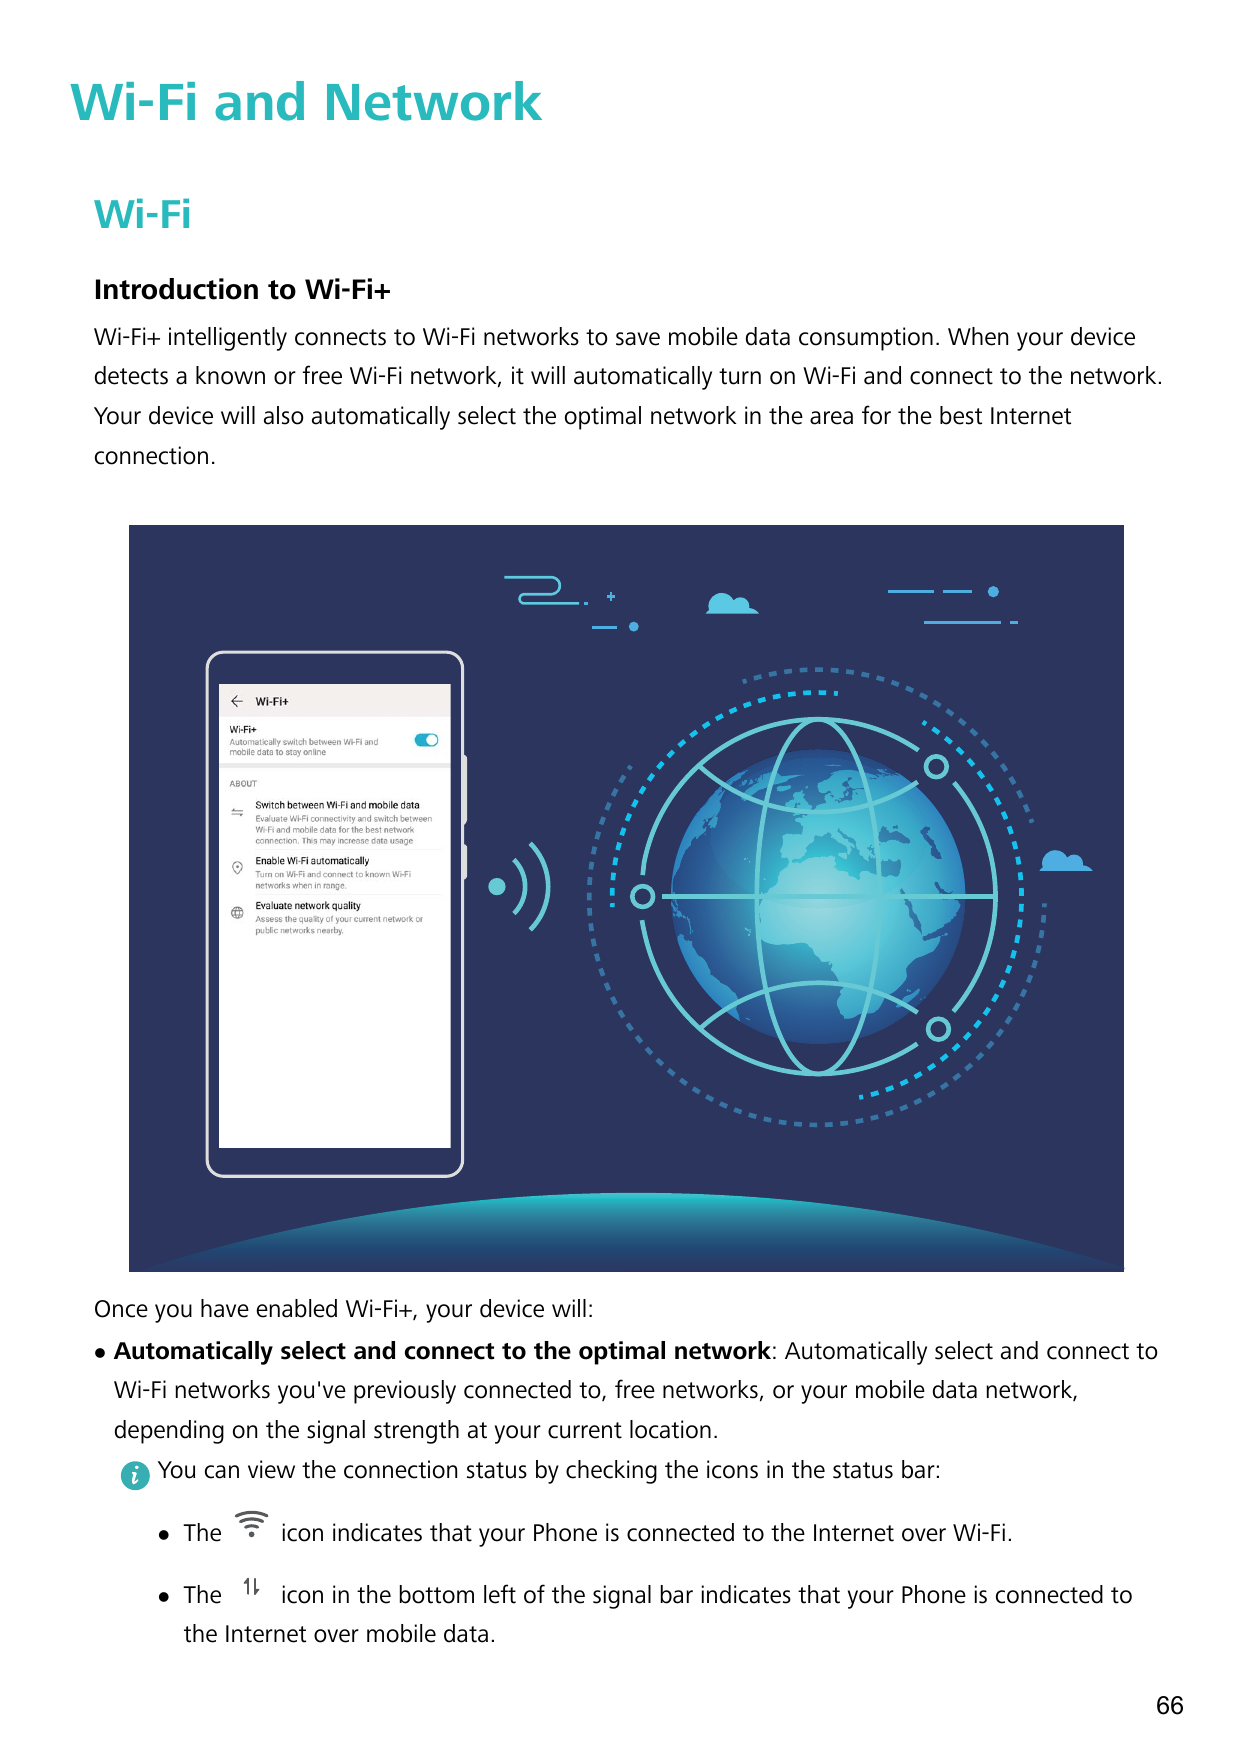 Wi-Fi and NetworkWi-FiIntroduction to Wi-Fi+Wi-Fi+ intelligently connects to Wi-Fi networks to save mobile data consumption. Whe